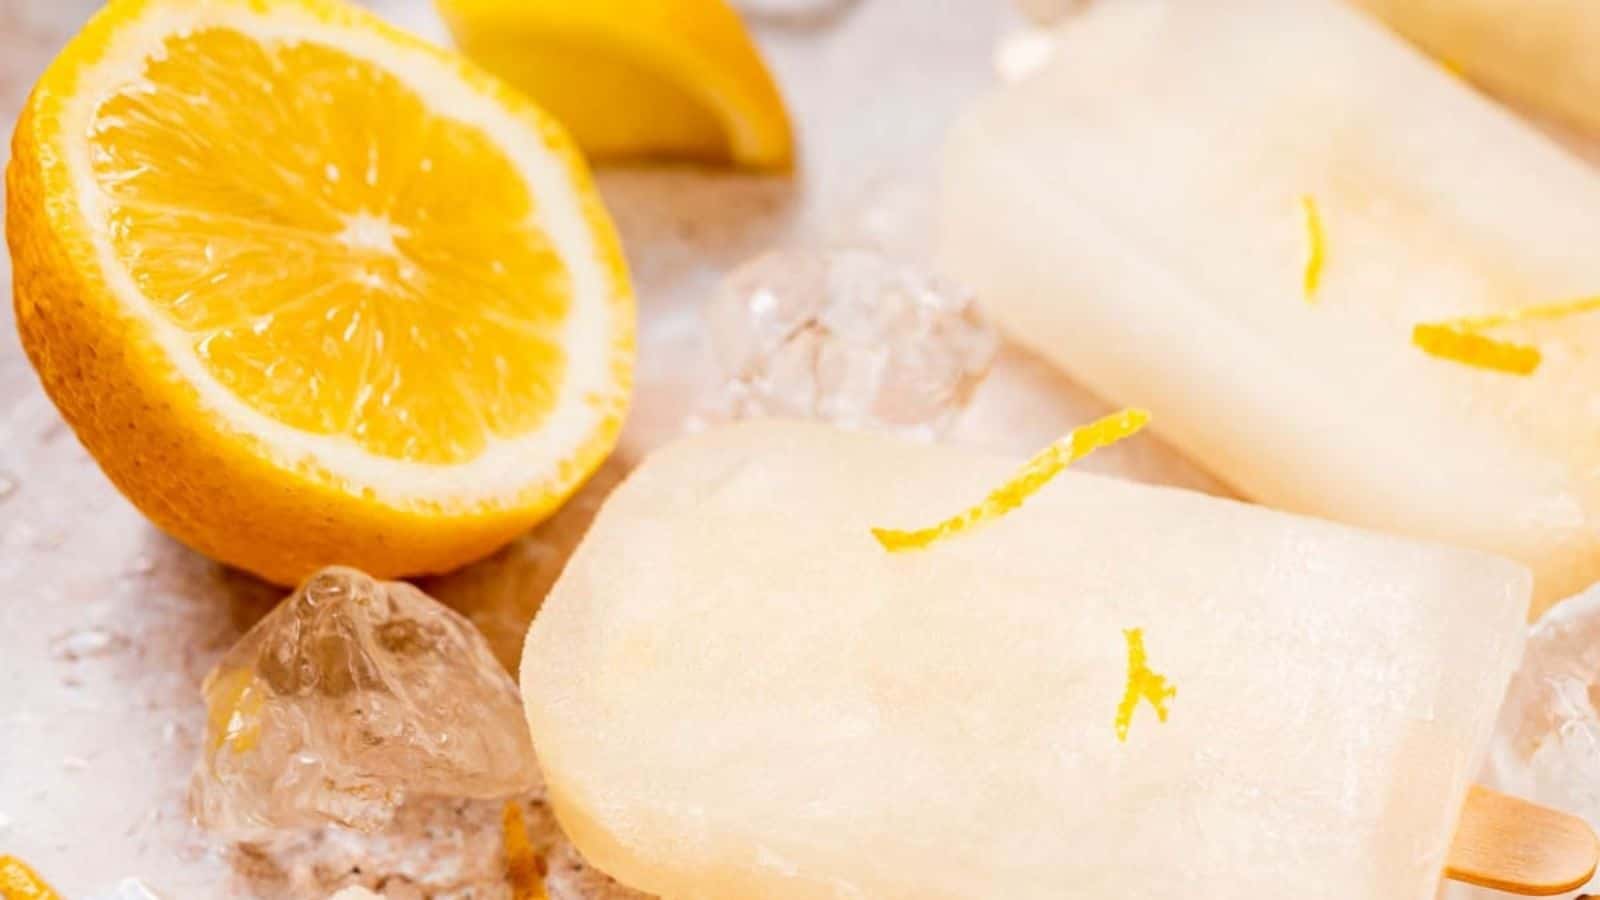 A close-up image of lemonade popsicles with a half of lemon on the side.